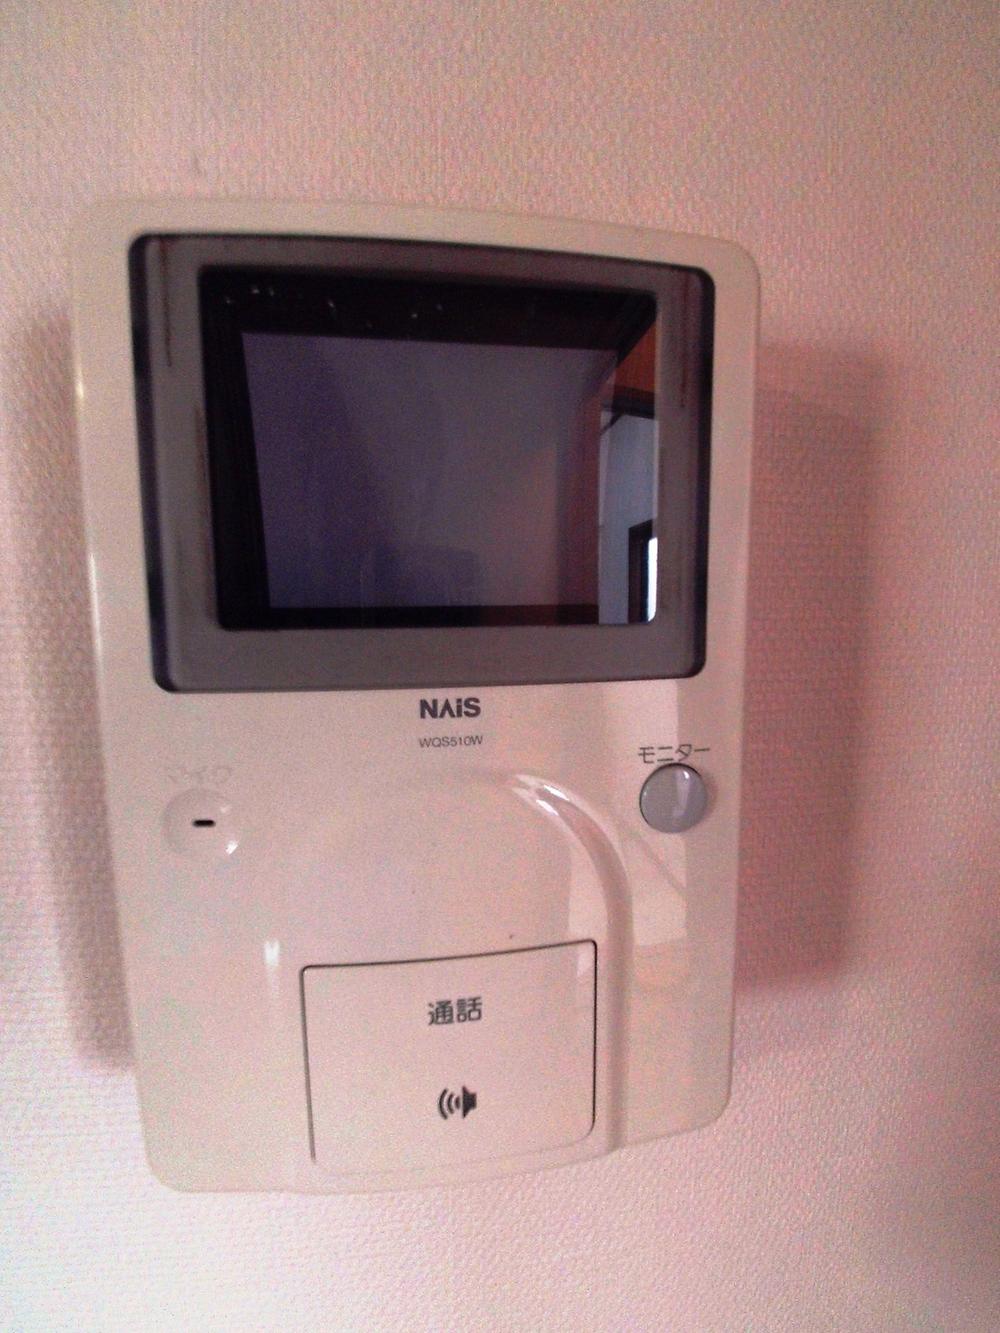 Security equipment. safety ・ Peace of mind ・ Convenient TV monitor with intercom